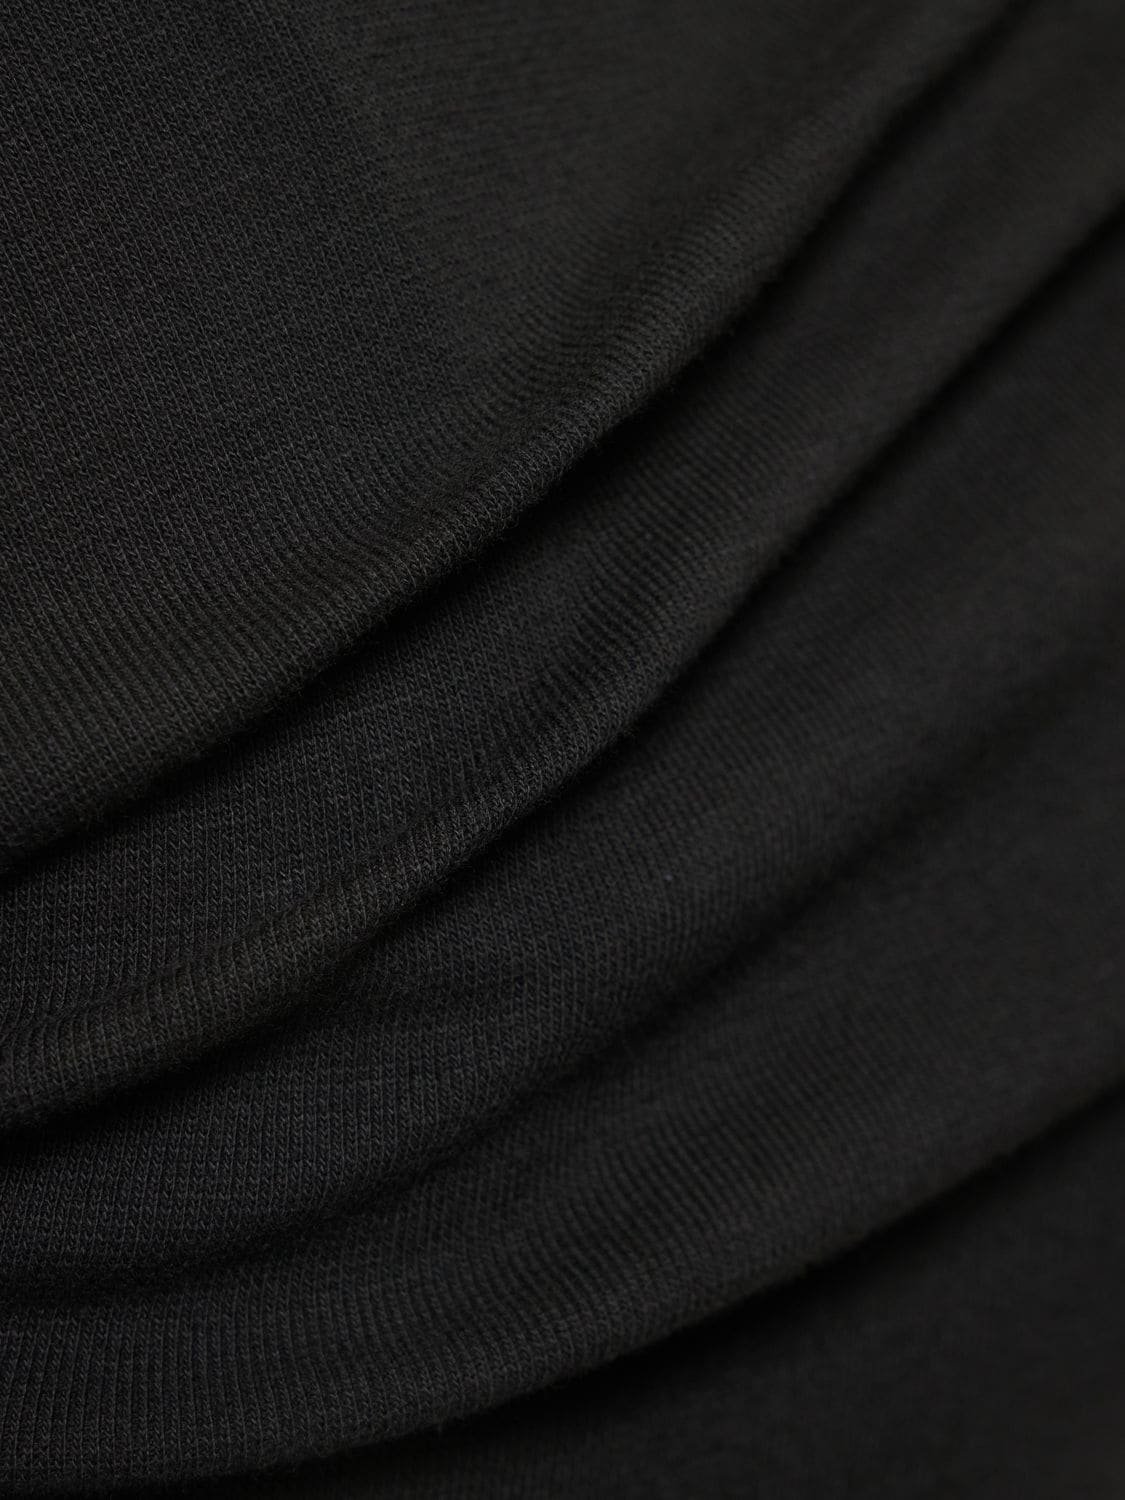 Shop Wardrobe.nyc Hb Long Sleeve Stretch Cotton Tee In Black